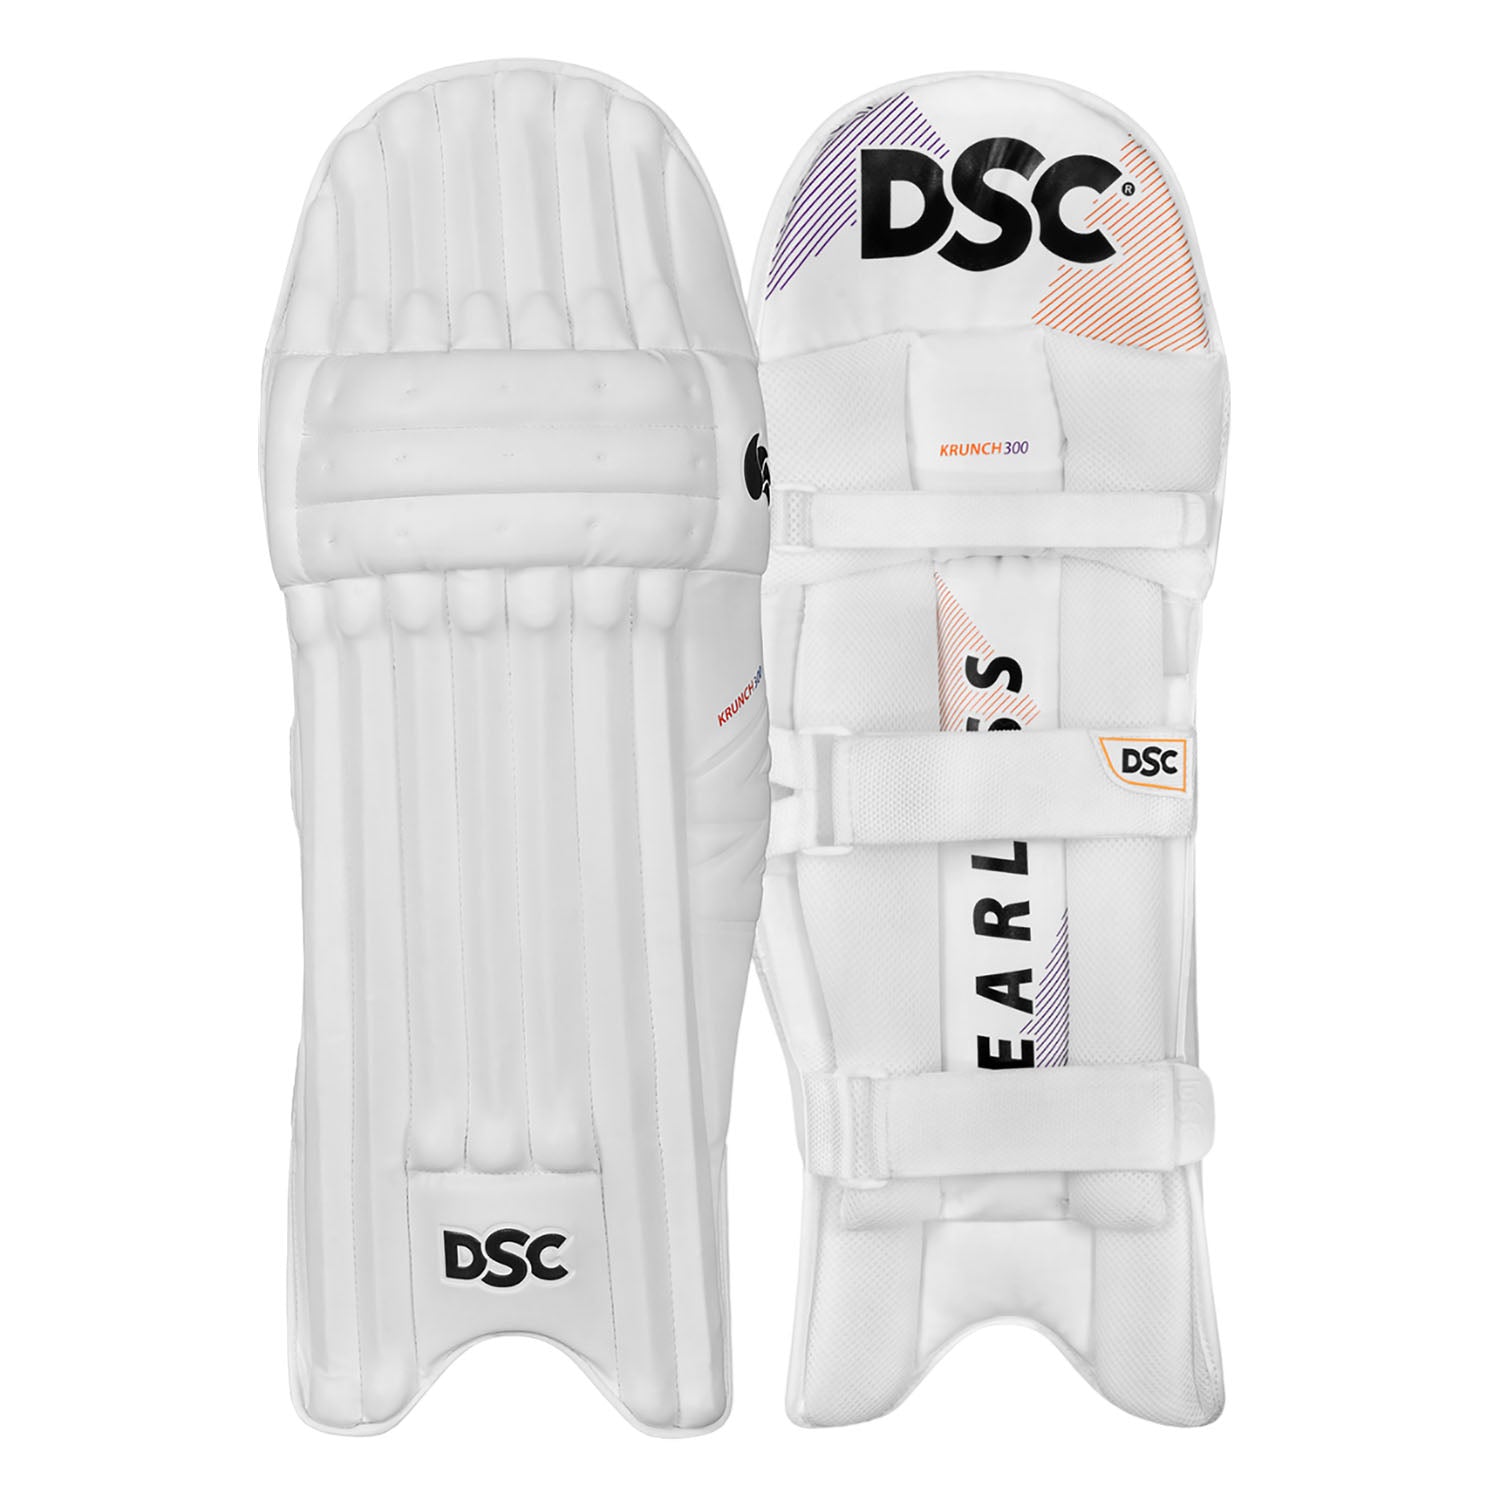 DSC Krunch 300 Cricket Batting Pads - Buy Online From Stagsports